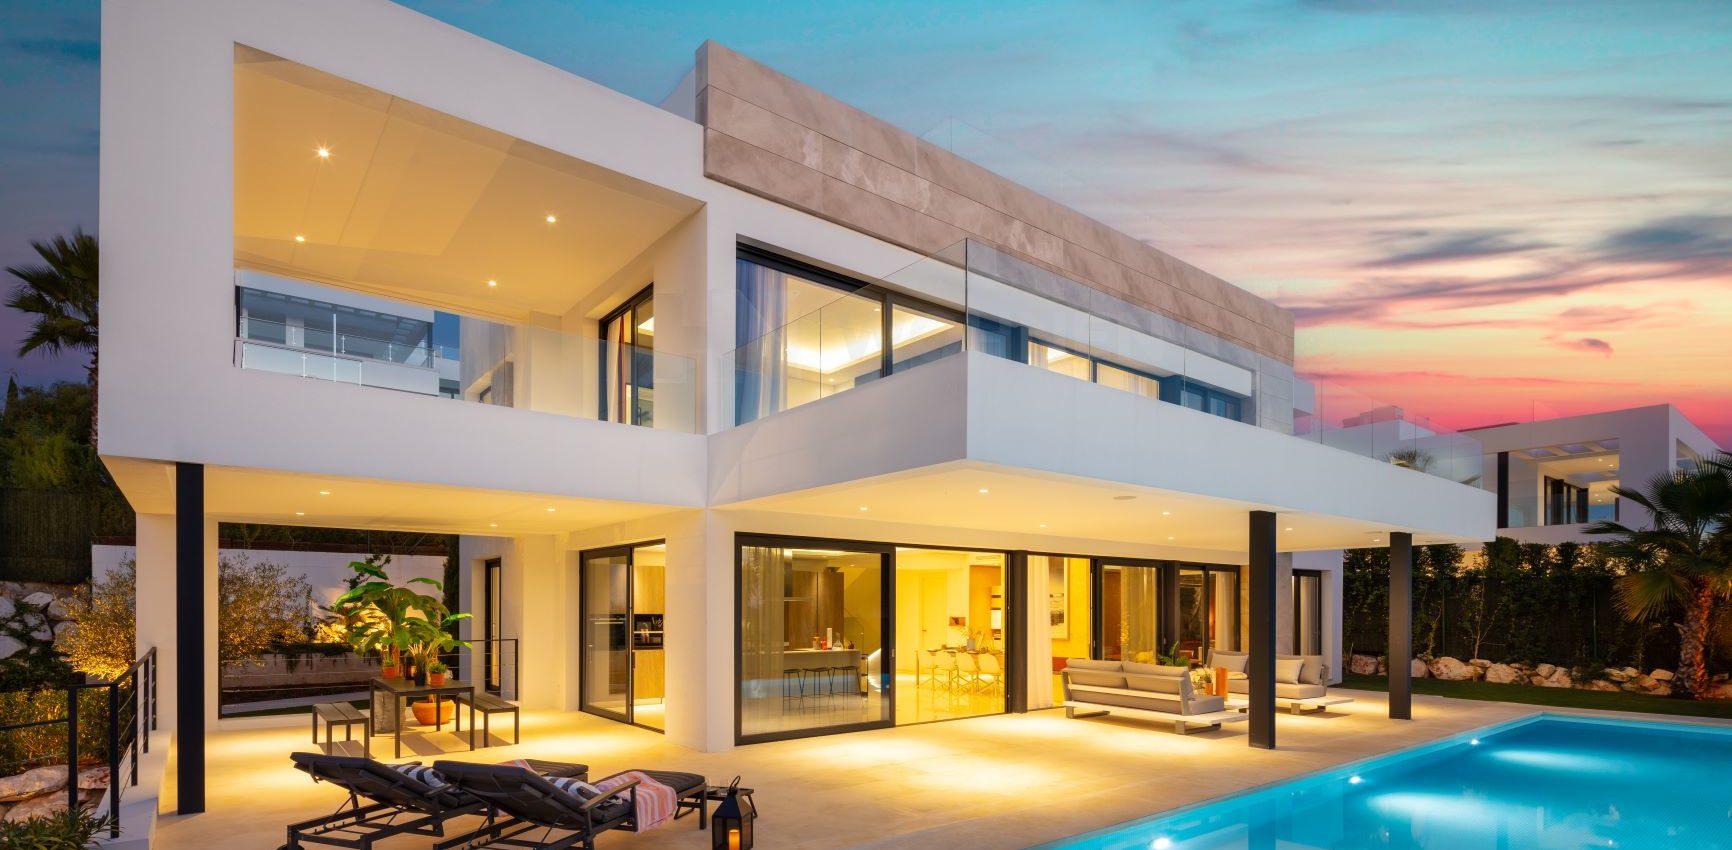 Modern new build villas with views over Nueva Andalucia and the sea